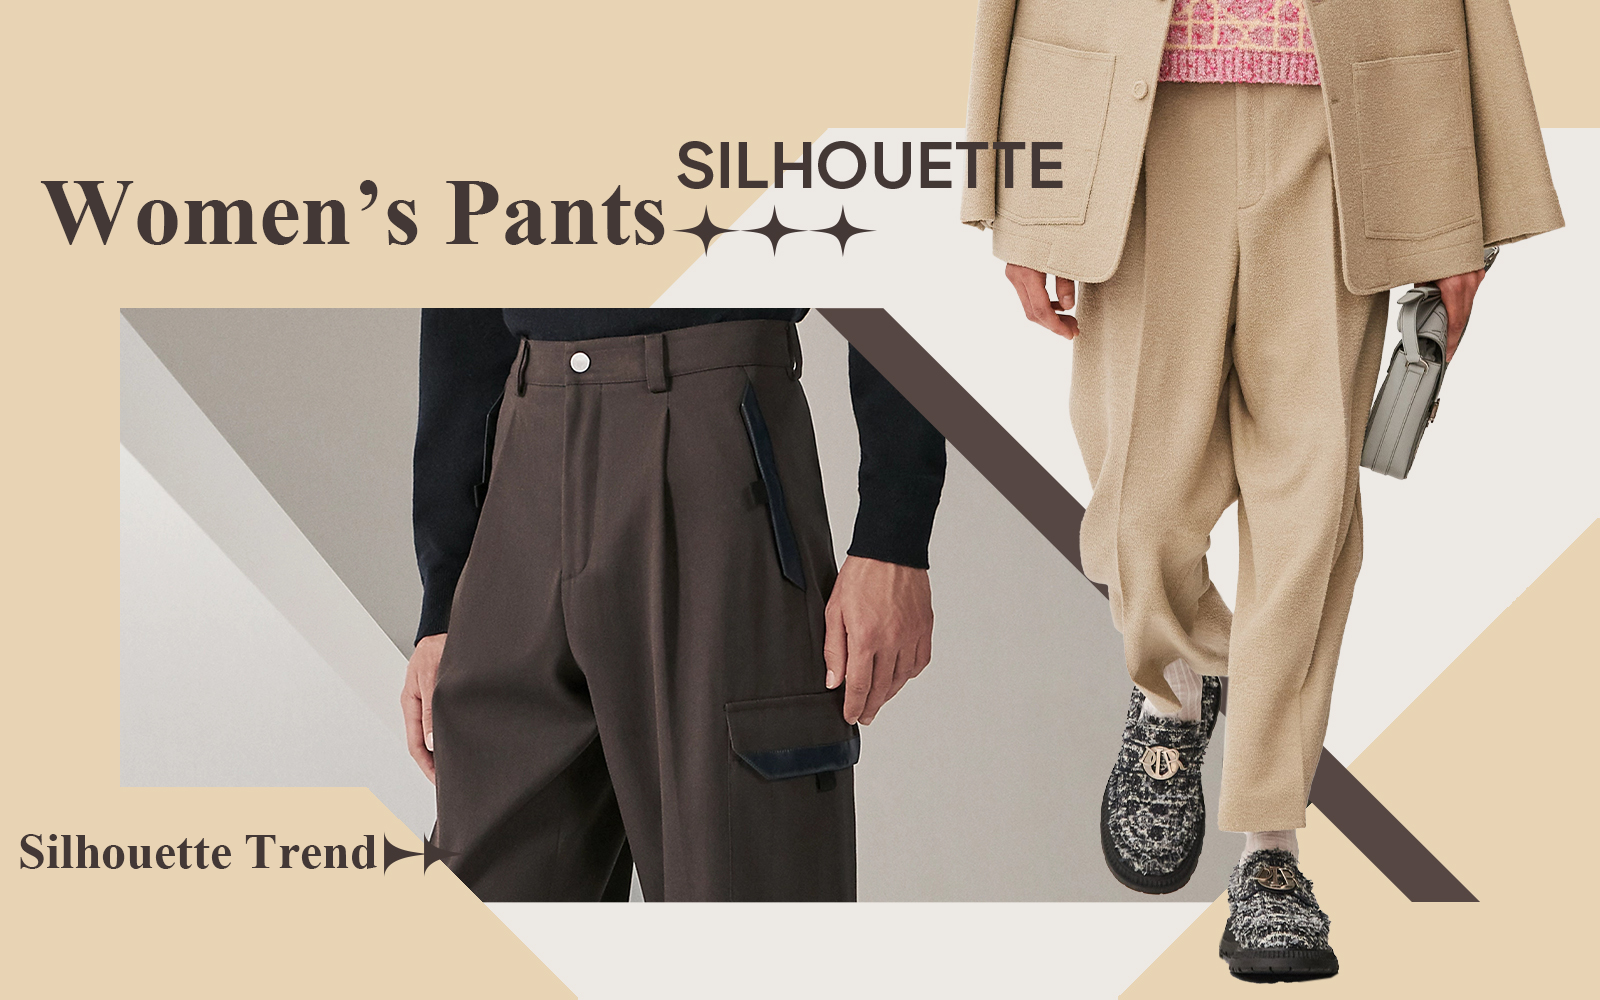 Business Leisure -- The Silhouette Trend for Men's Pants